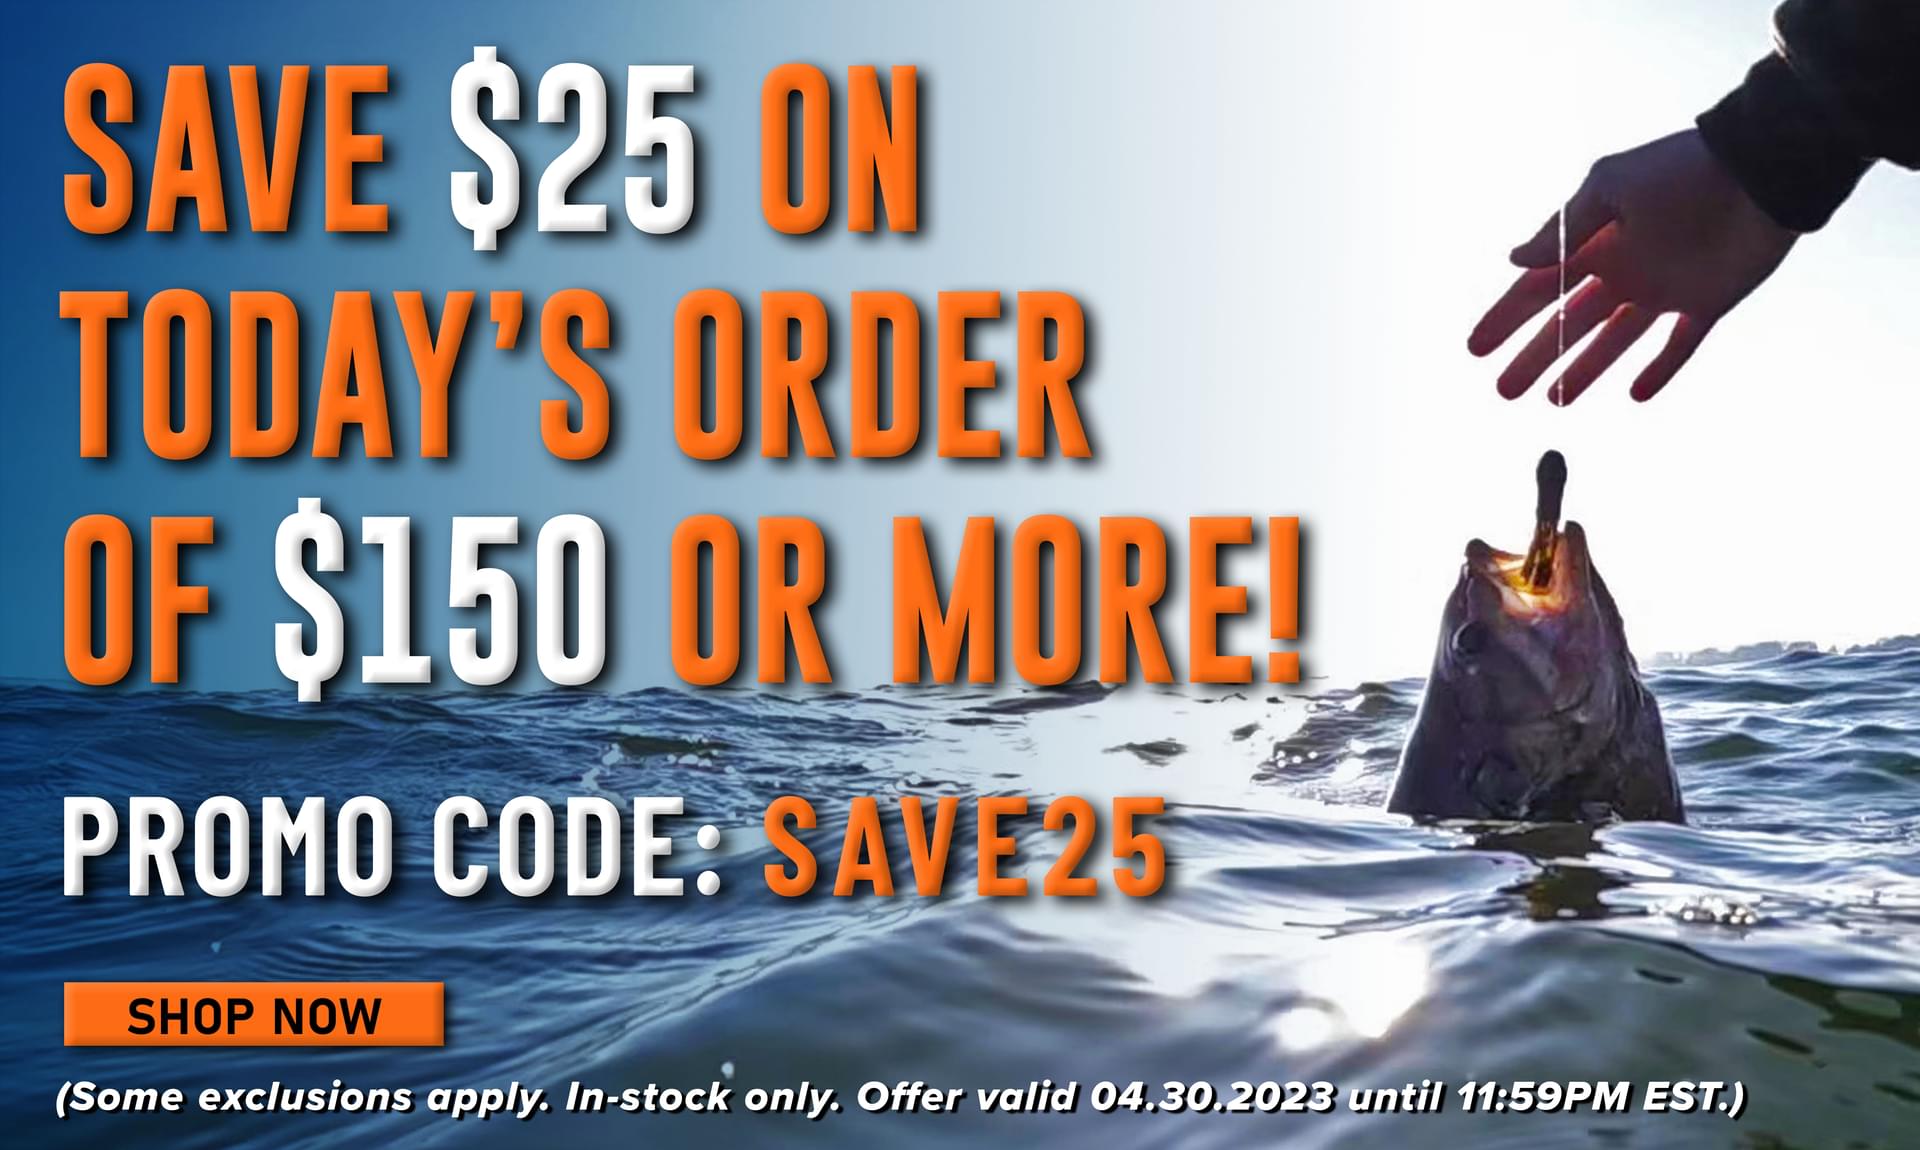 Save $25 On Today's Order Of $150 Or More! Promo Code: SAVE25 Shop Now (Some exclusions apply. In-stock only. Offer valid 04.30.2023 until 11:59PM EST.)